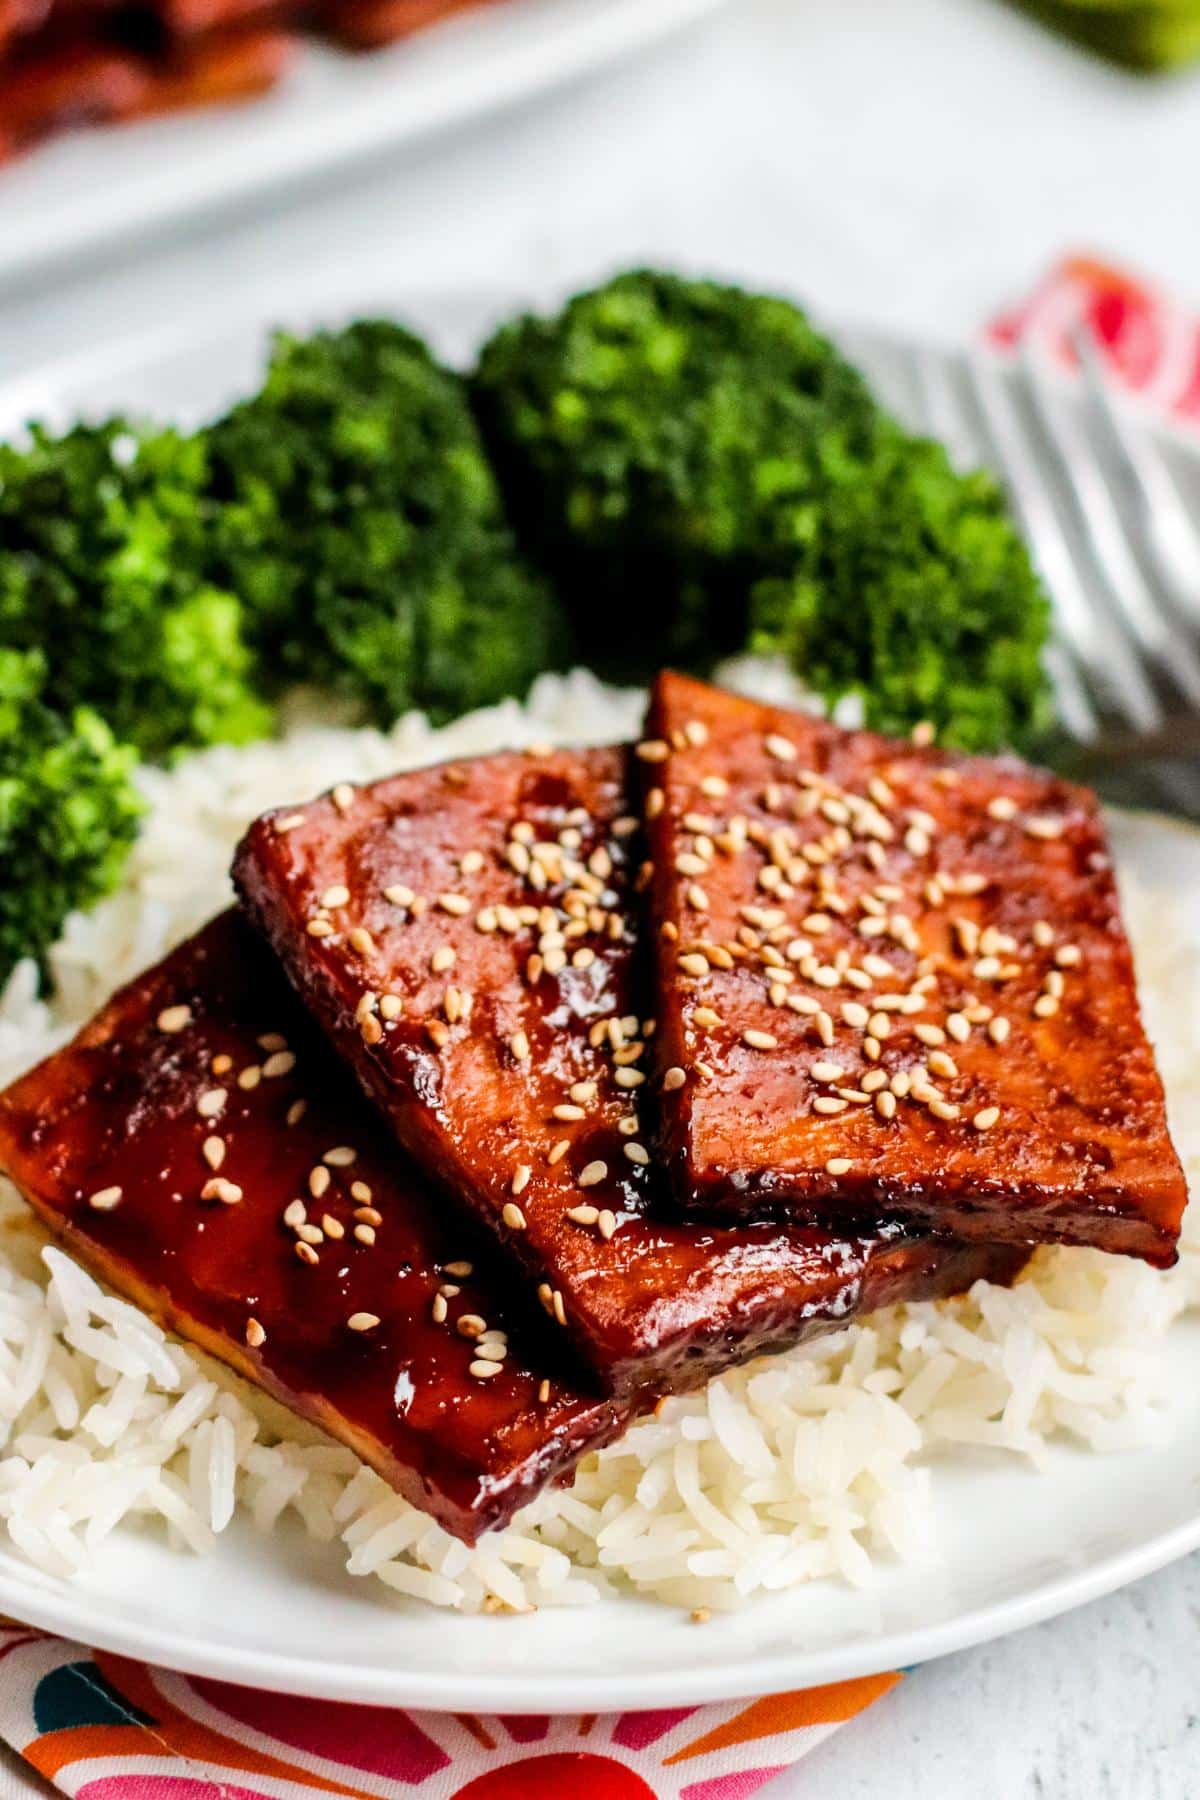 Slices of tofu garnished with sesame seeds on a plate of rice.